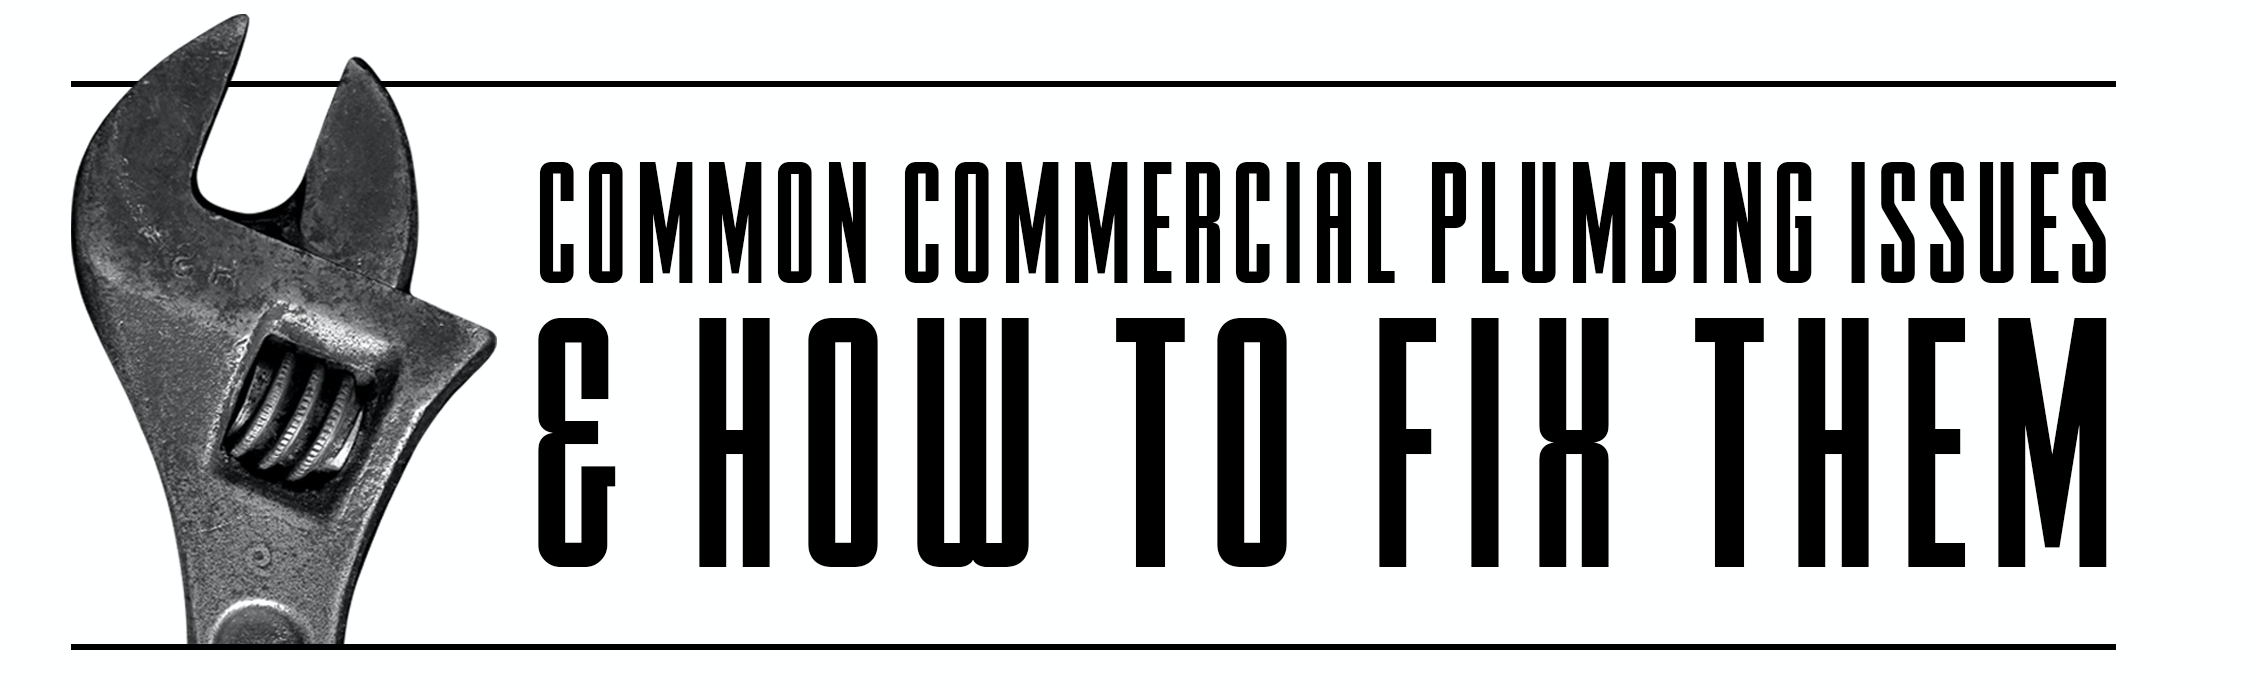 common commercial plumbing problems and how to fix them title graphic